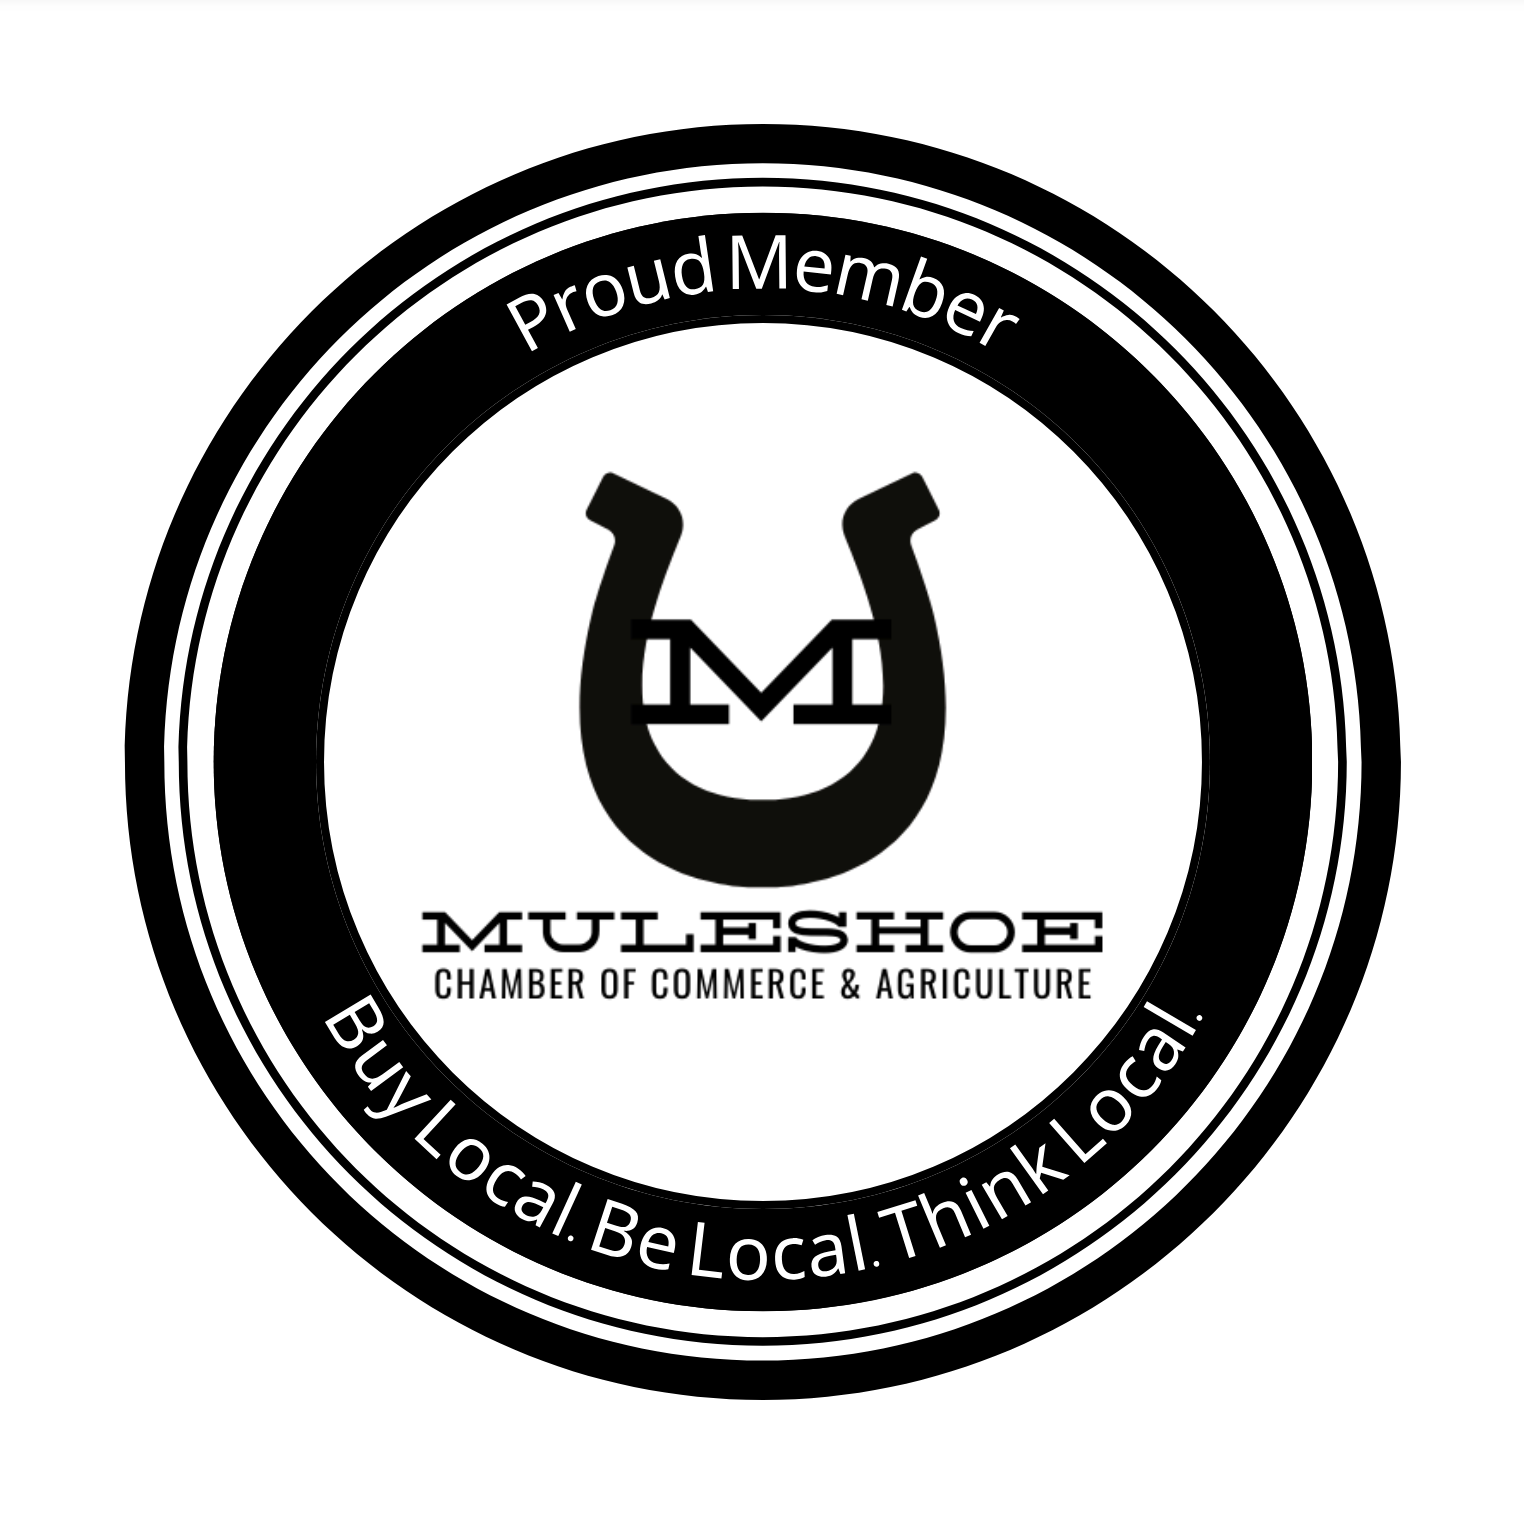 Logo of the muleshoe chamber of commerce and agriculture featuring a horseshoe symbol and the slogans "buy local. be local. think local.